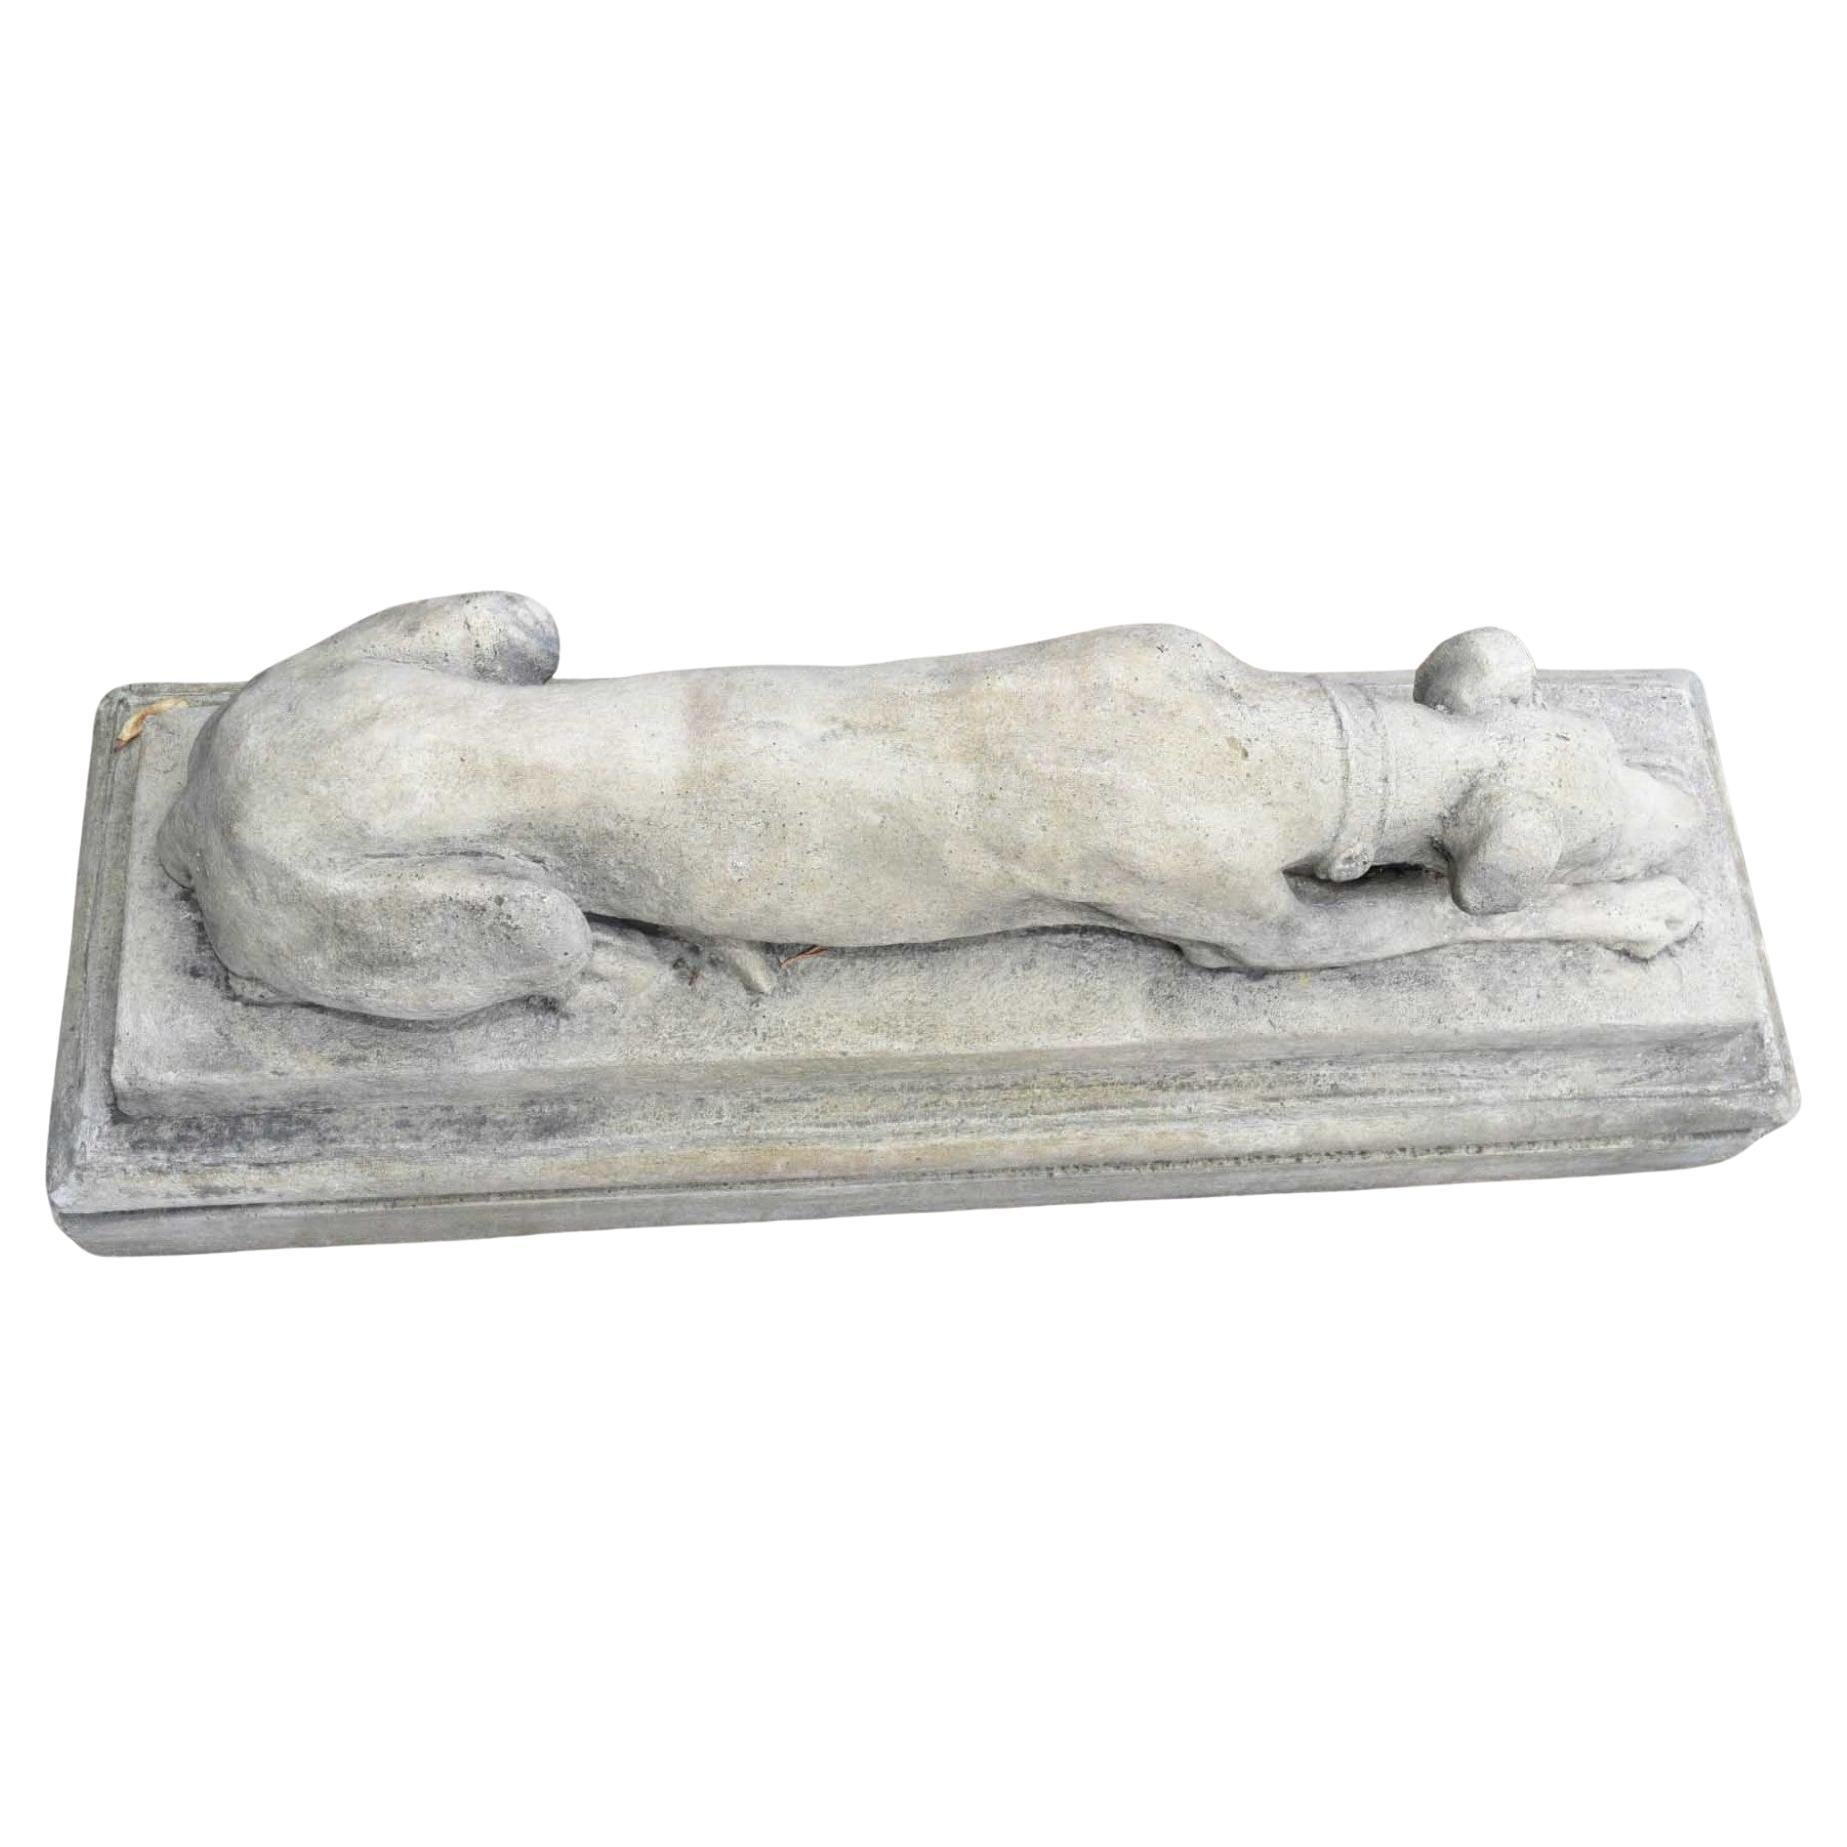 Wonderful pair of English sleeping hound statues
Great pair of classical gatekeeper dogs
Made from re-constitued stone
Please let us know if you would like to view this piece in our Canonbury Antiques Herts showroom, just 25 minutes north of London